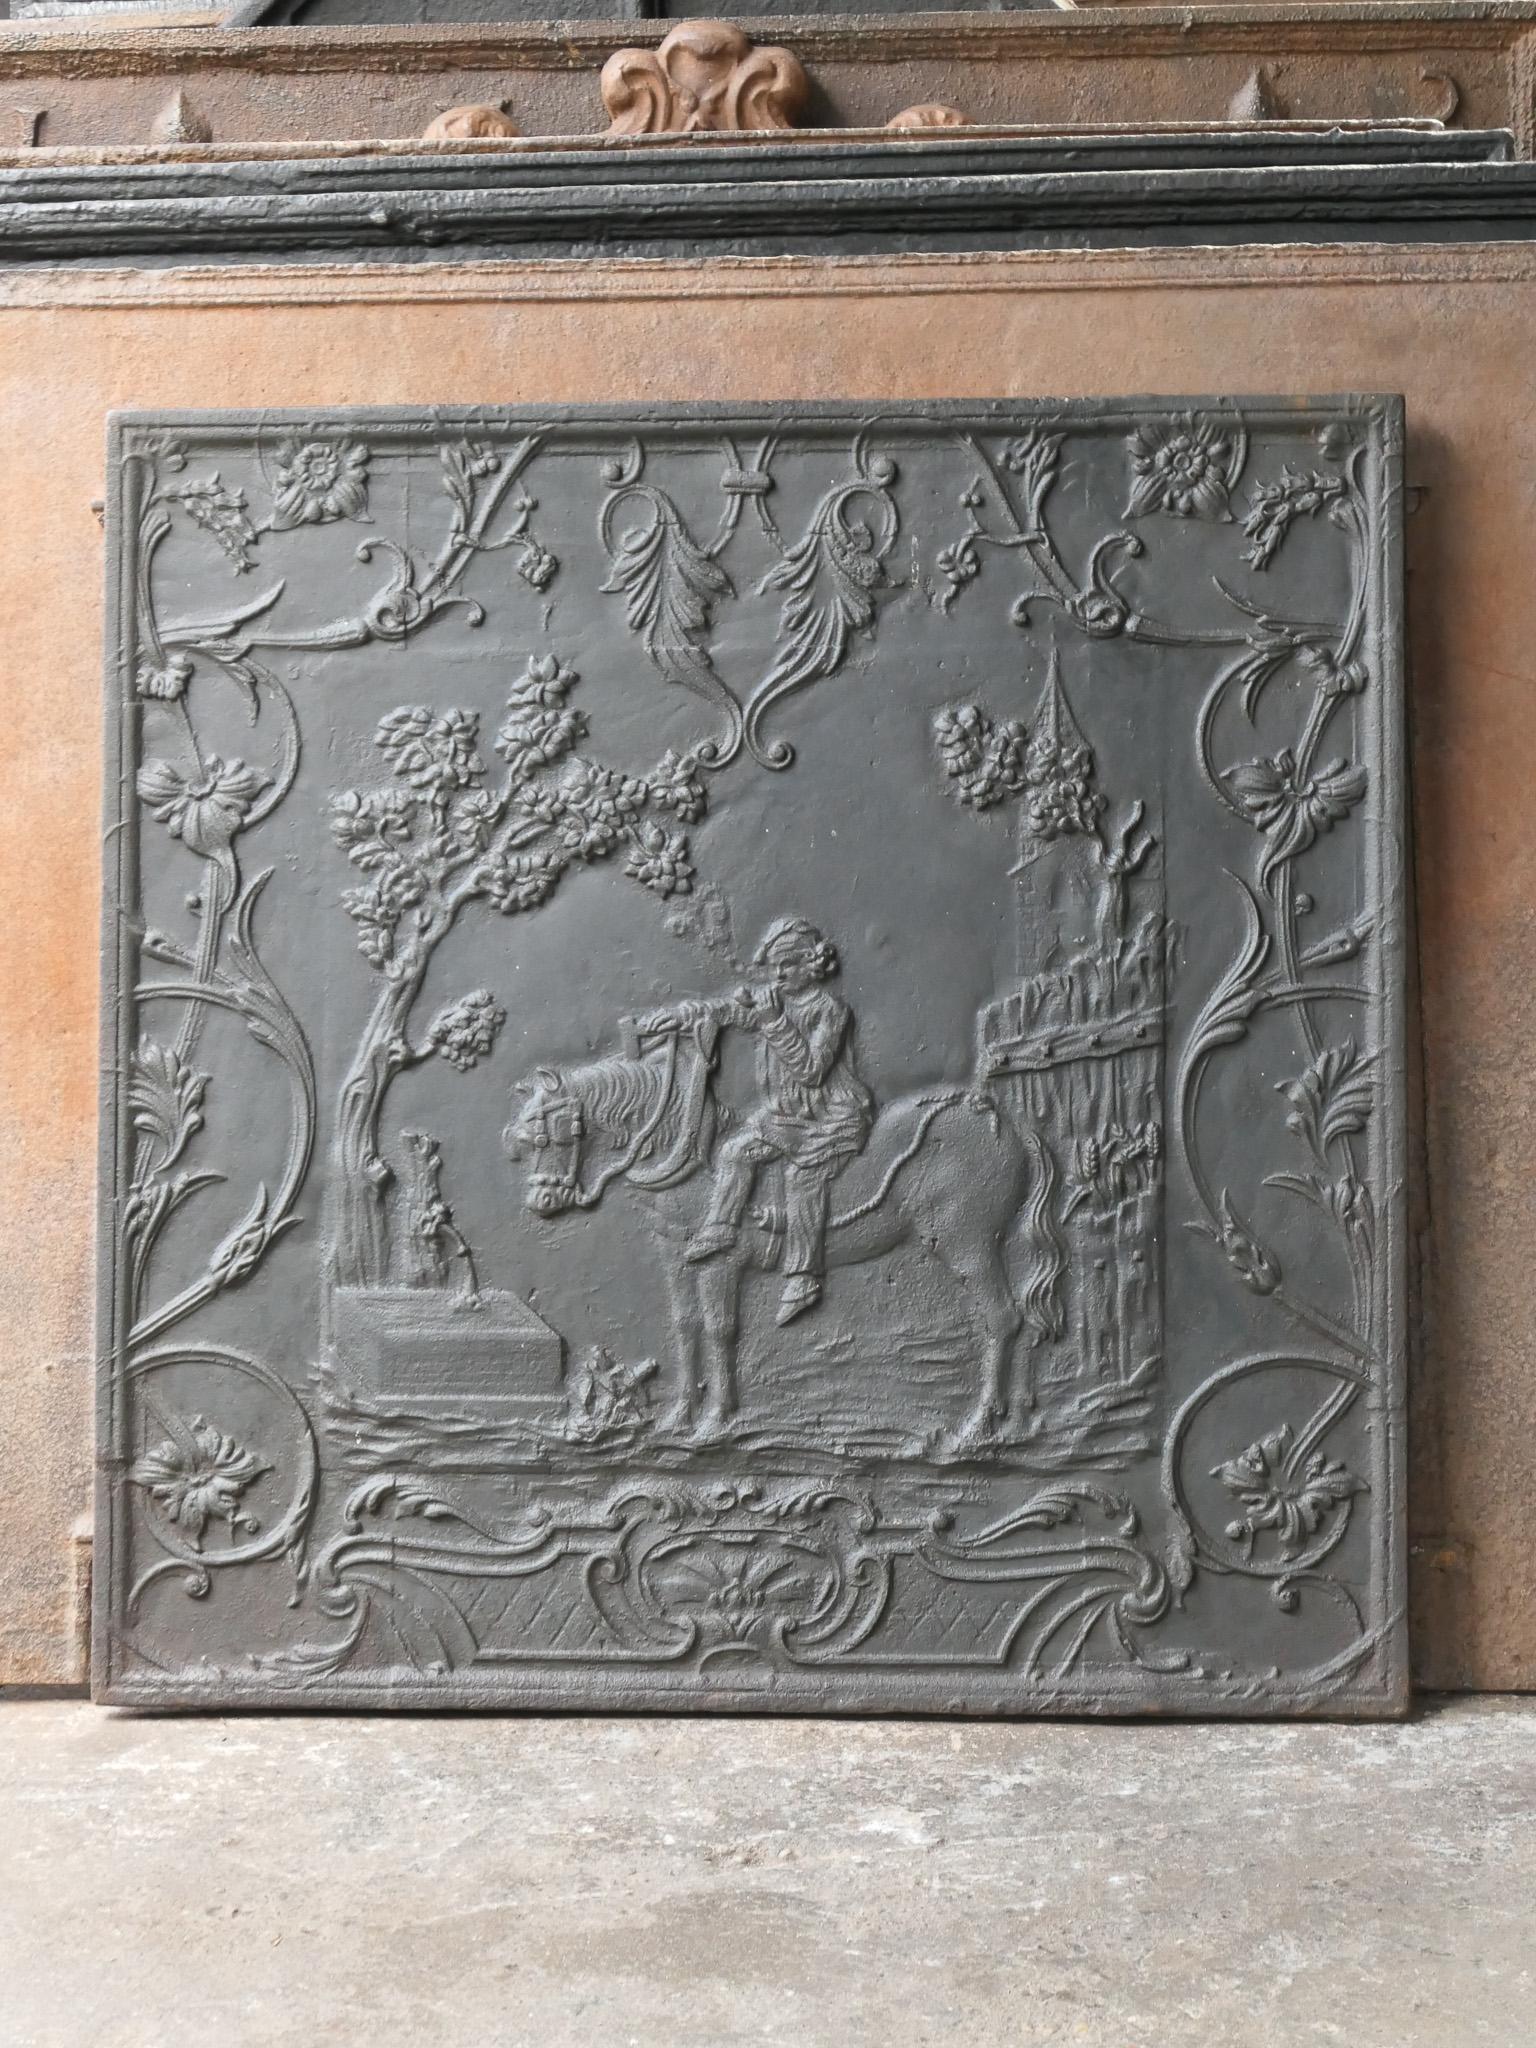 19th century French fireplace fireback with a rural scene. The fireback is made of cast iron and has a black /pewter patina. The fireback is in a good condition and does not have cracks.

This product weighs more than 65 kg / 143 lbs. All our